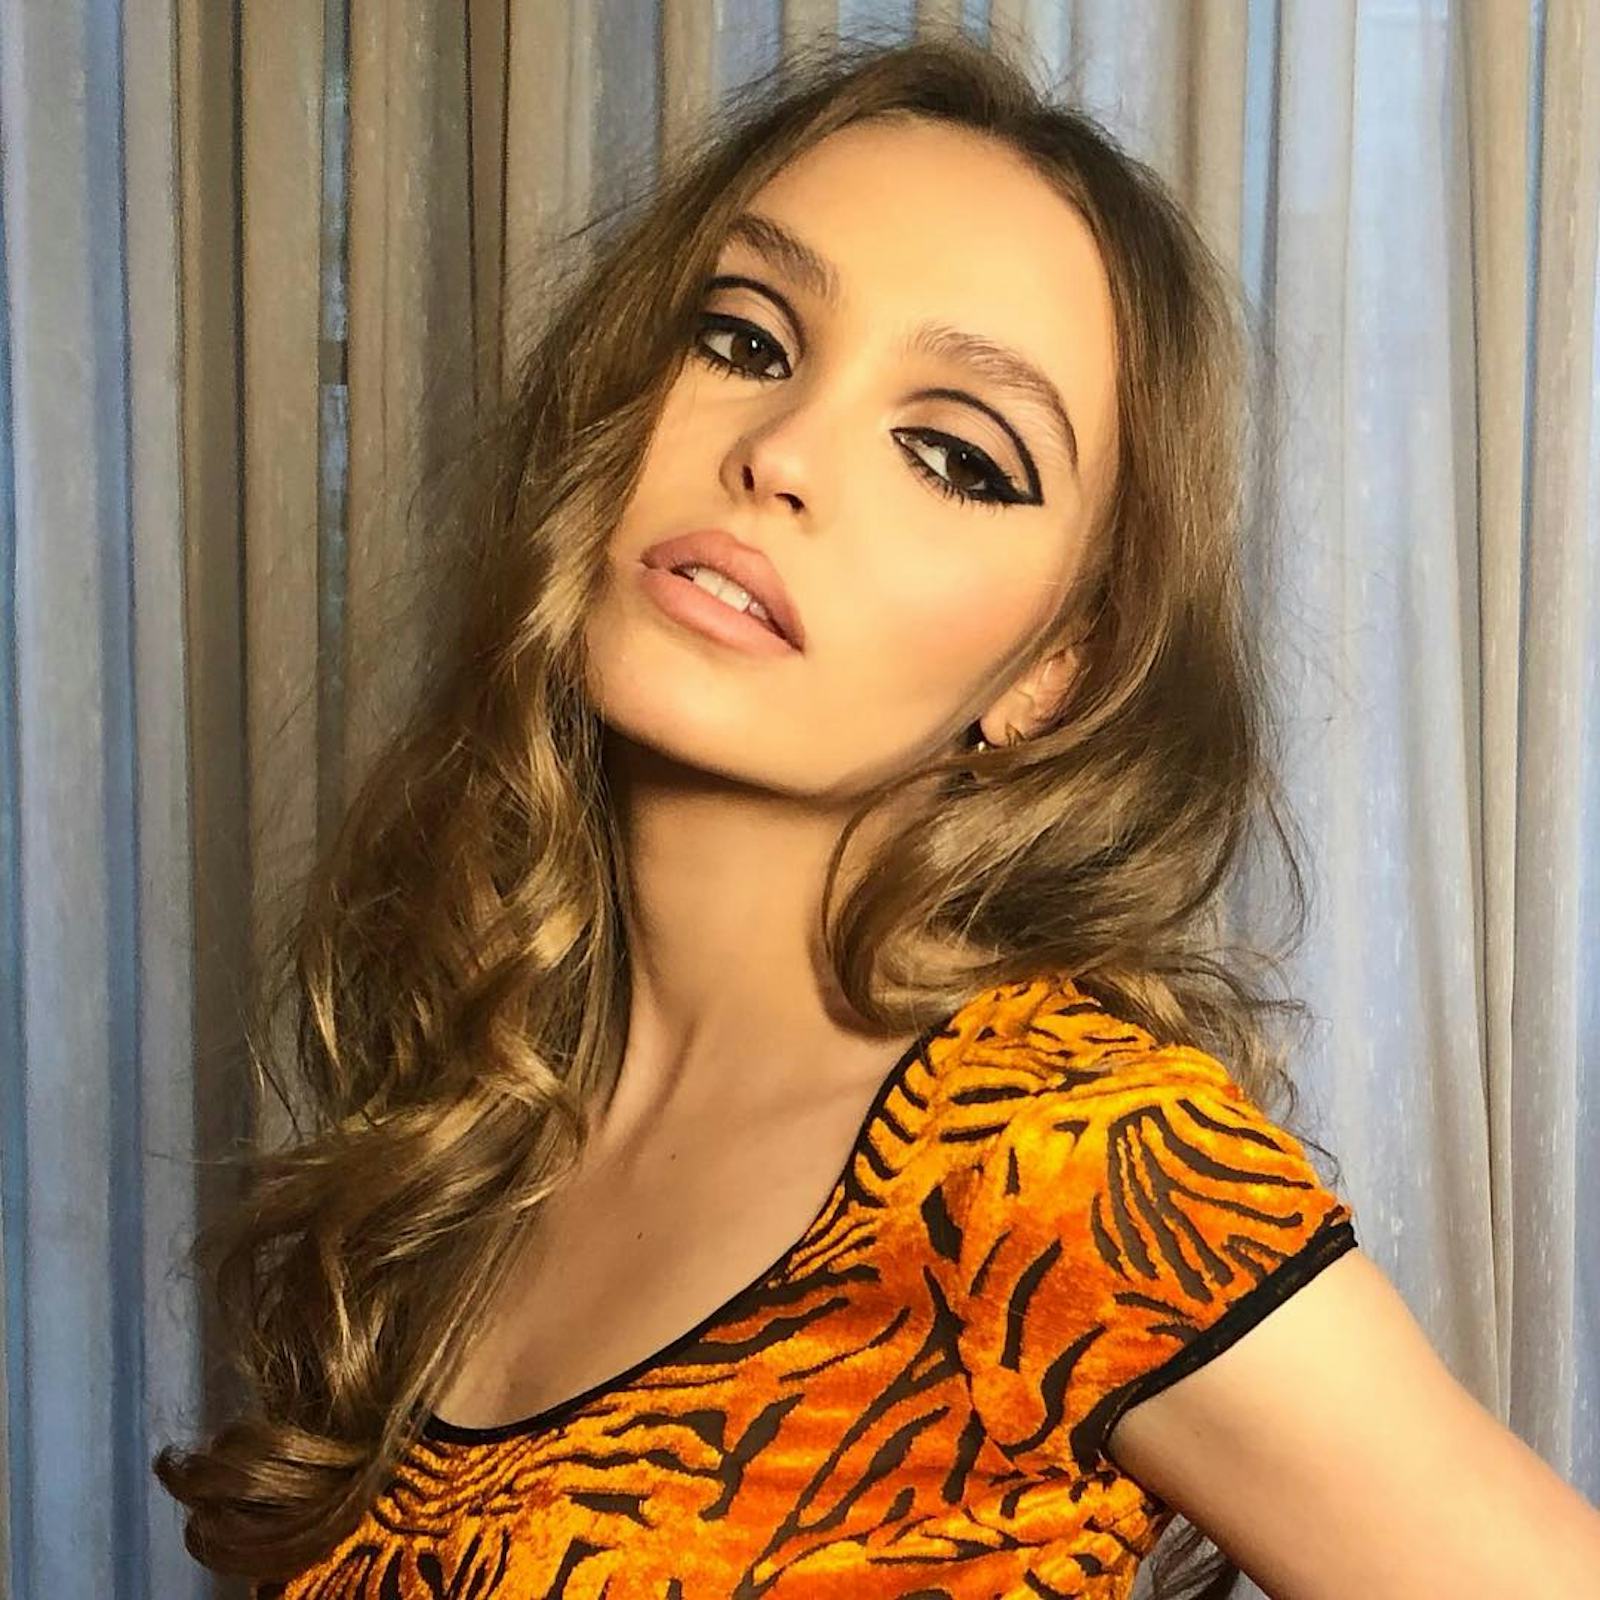 Thanks To TikTok, You Can Now Recreate Lily-Rose Depp’s Viral Nude Lipstick